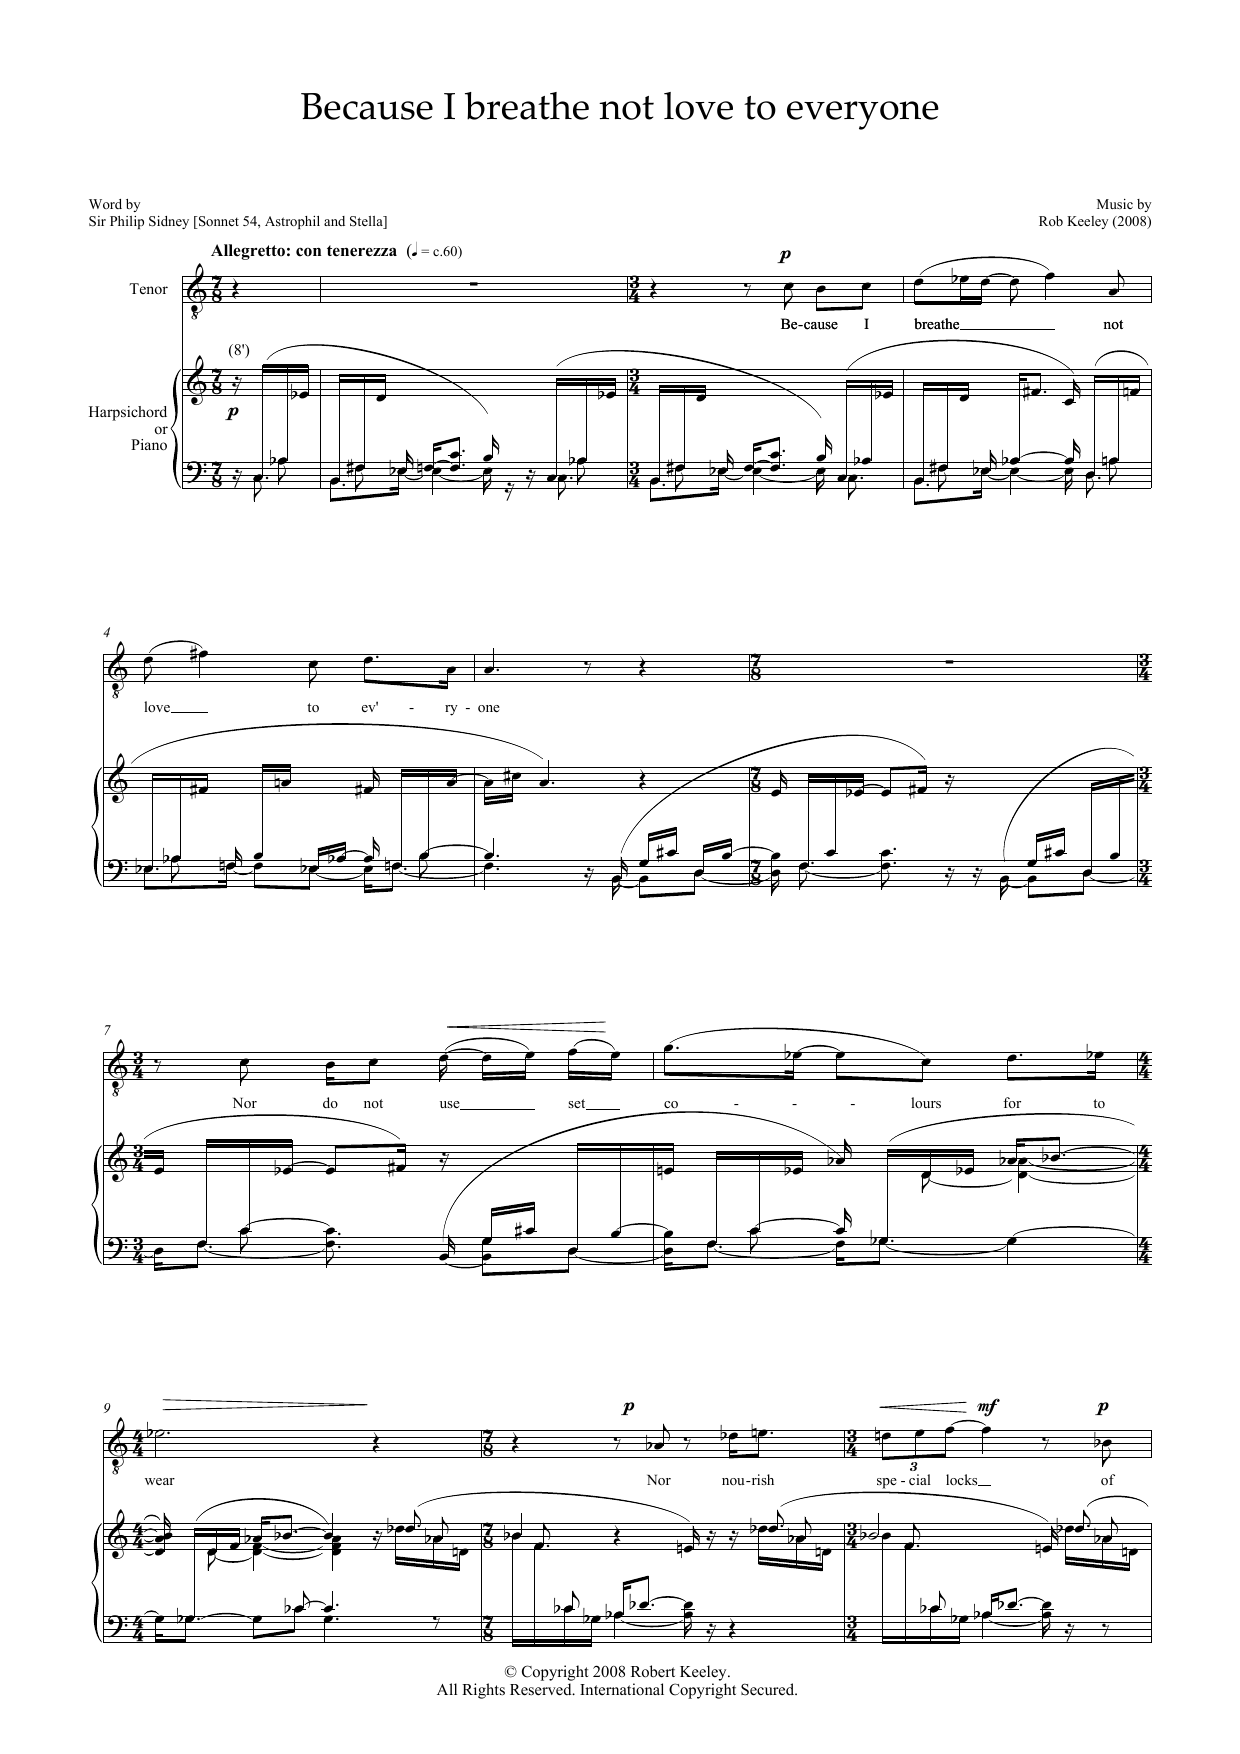 Download Robert Keeley Because I breathe not love to everyone Sheet Music